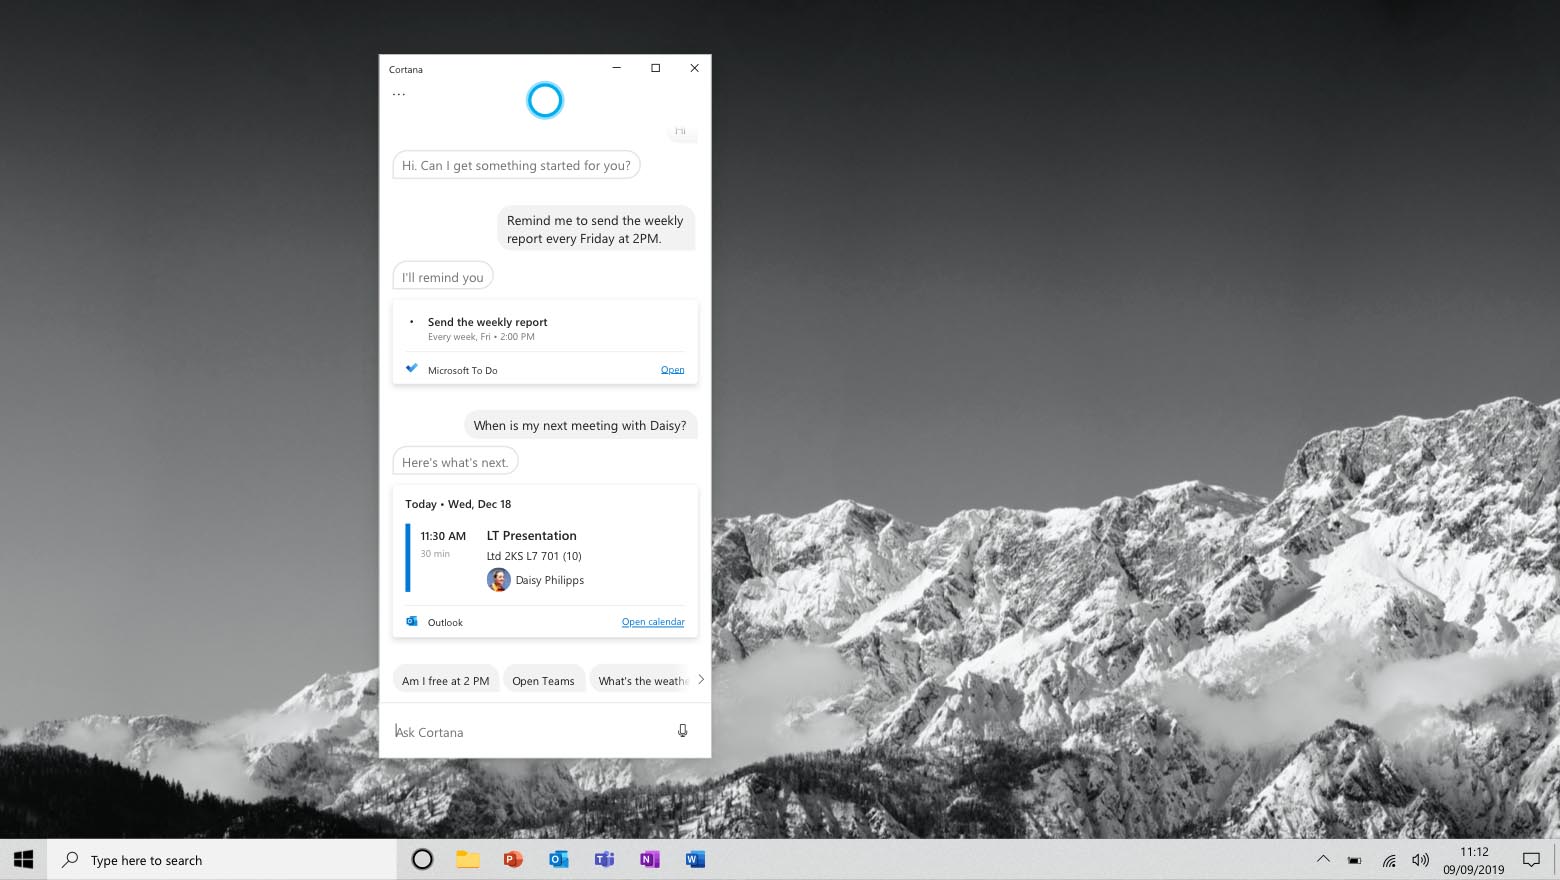 Microsoft announces updated Cortana experience by removing music, connected home and third-party skills